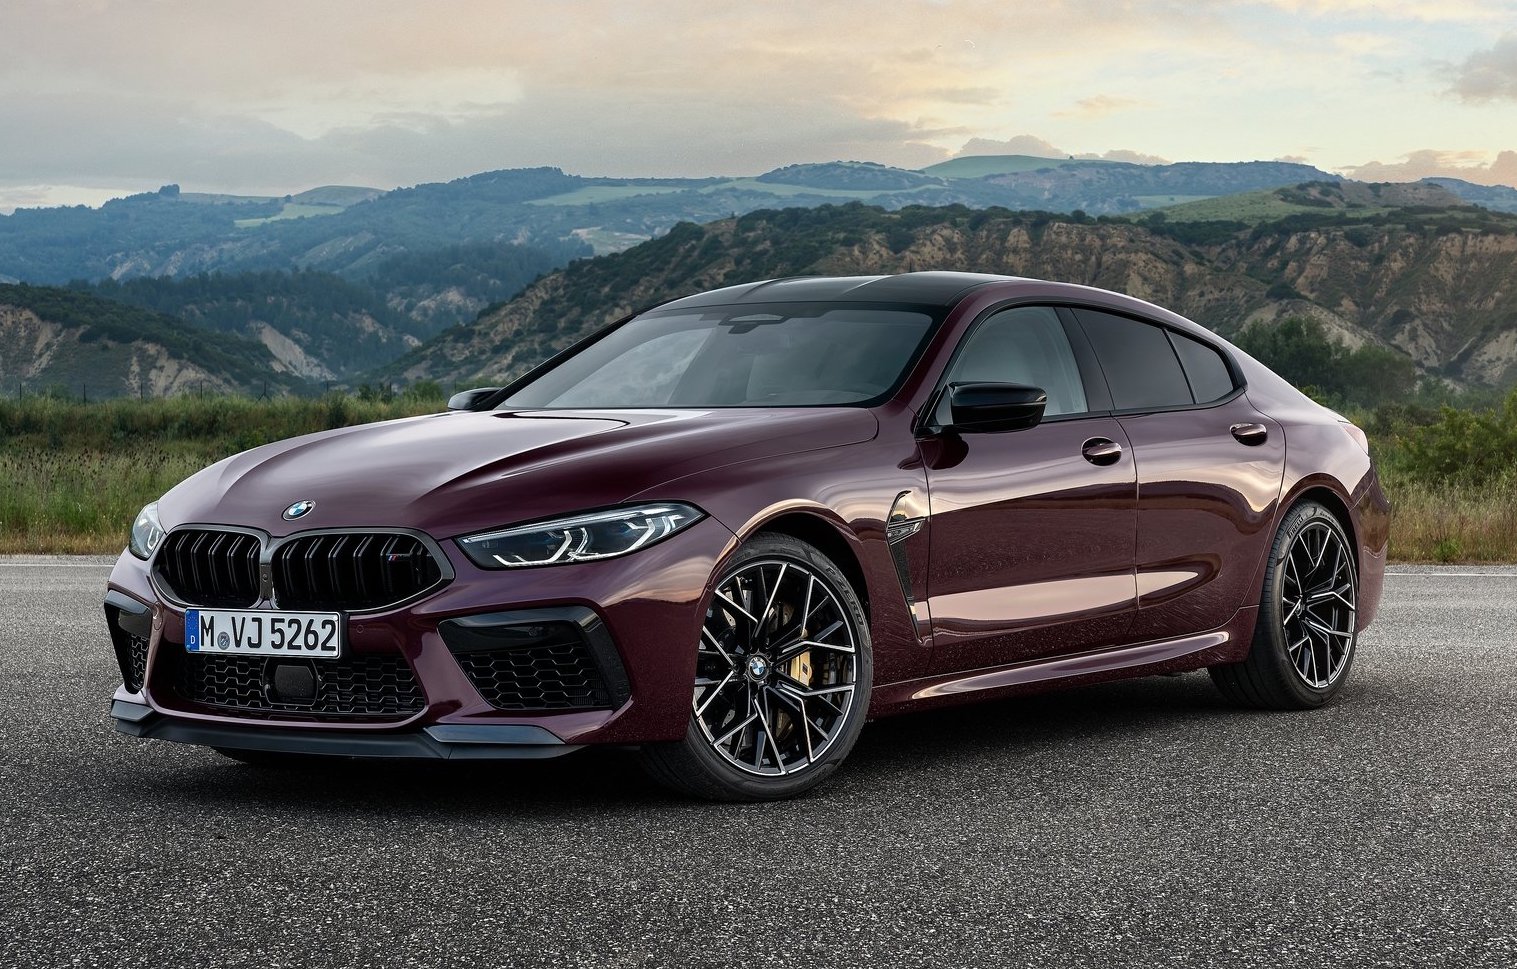 BMW 2 Series Gran Coupe, M2 CS, M8 prices confirmed